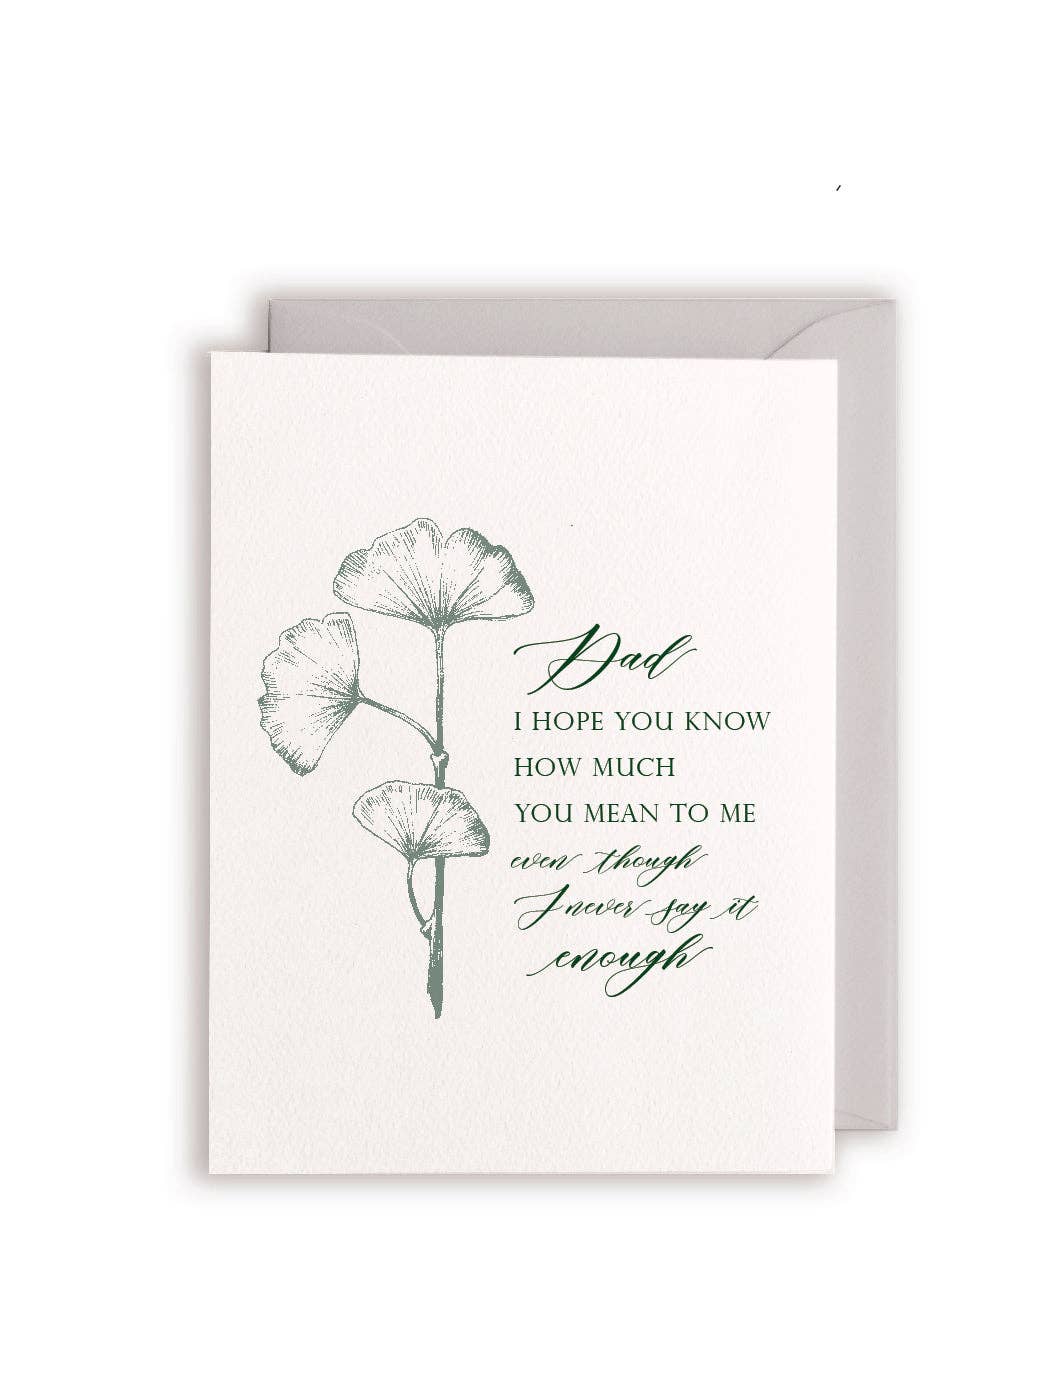 Dad, I Hope You Know How Much You Mean to Me Letterpress Greeting Card - Rust Belt Love Paperie